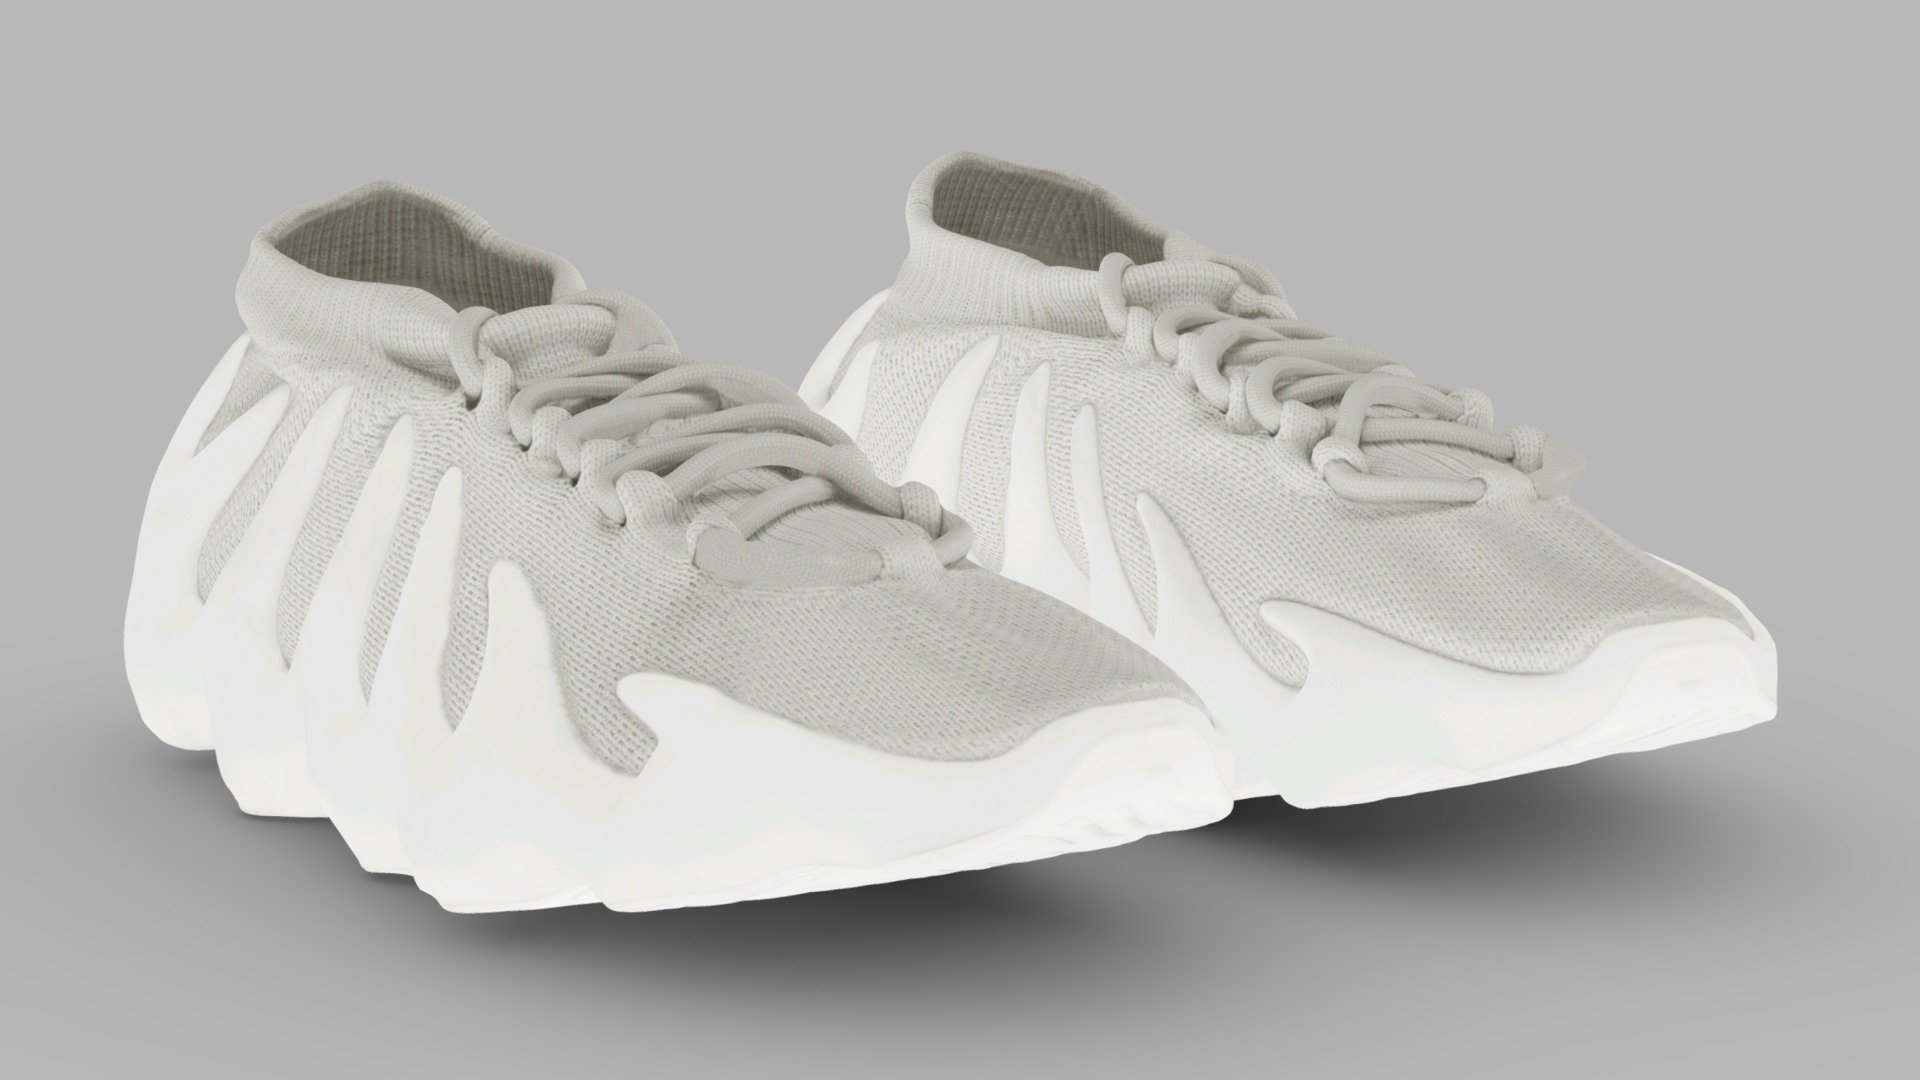 A Very Detailed shoes with High-Quality .

The Mesh is UV unwrapped.

4096x4096 Texture Maps jpg，in the compressed file rar.

The textures is lighting baked,the texture is uploaded to preview images.

File Formats :

FBX .OBJ .stl.collada(dae).Maya2019,Texture(jpg format).

If you want to modify the color of the shoes, it is easy to do with photopshop. The screenshot shows how to do it.

This is a professional scanning agency, if there are any shoes that are not included, please let me know.My E-mail:951723610@qq.com,It will helps a lot.By the way,we are available for custom shoes scan.

Don't forget to check my other sneakers,Have a nice day：） - Adidas Yeezy 450 - Buy Royalty Free 3D model by Vincent Page (@vincentpage) 3d model